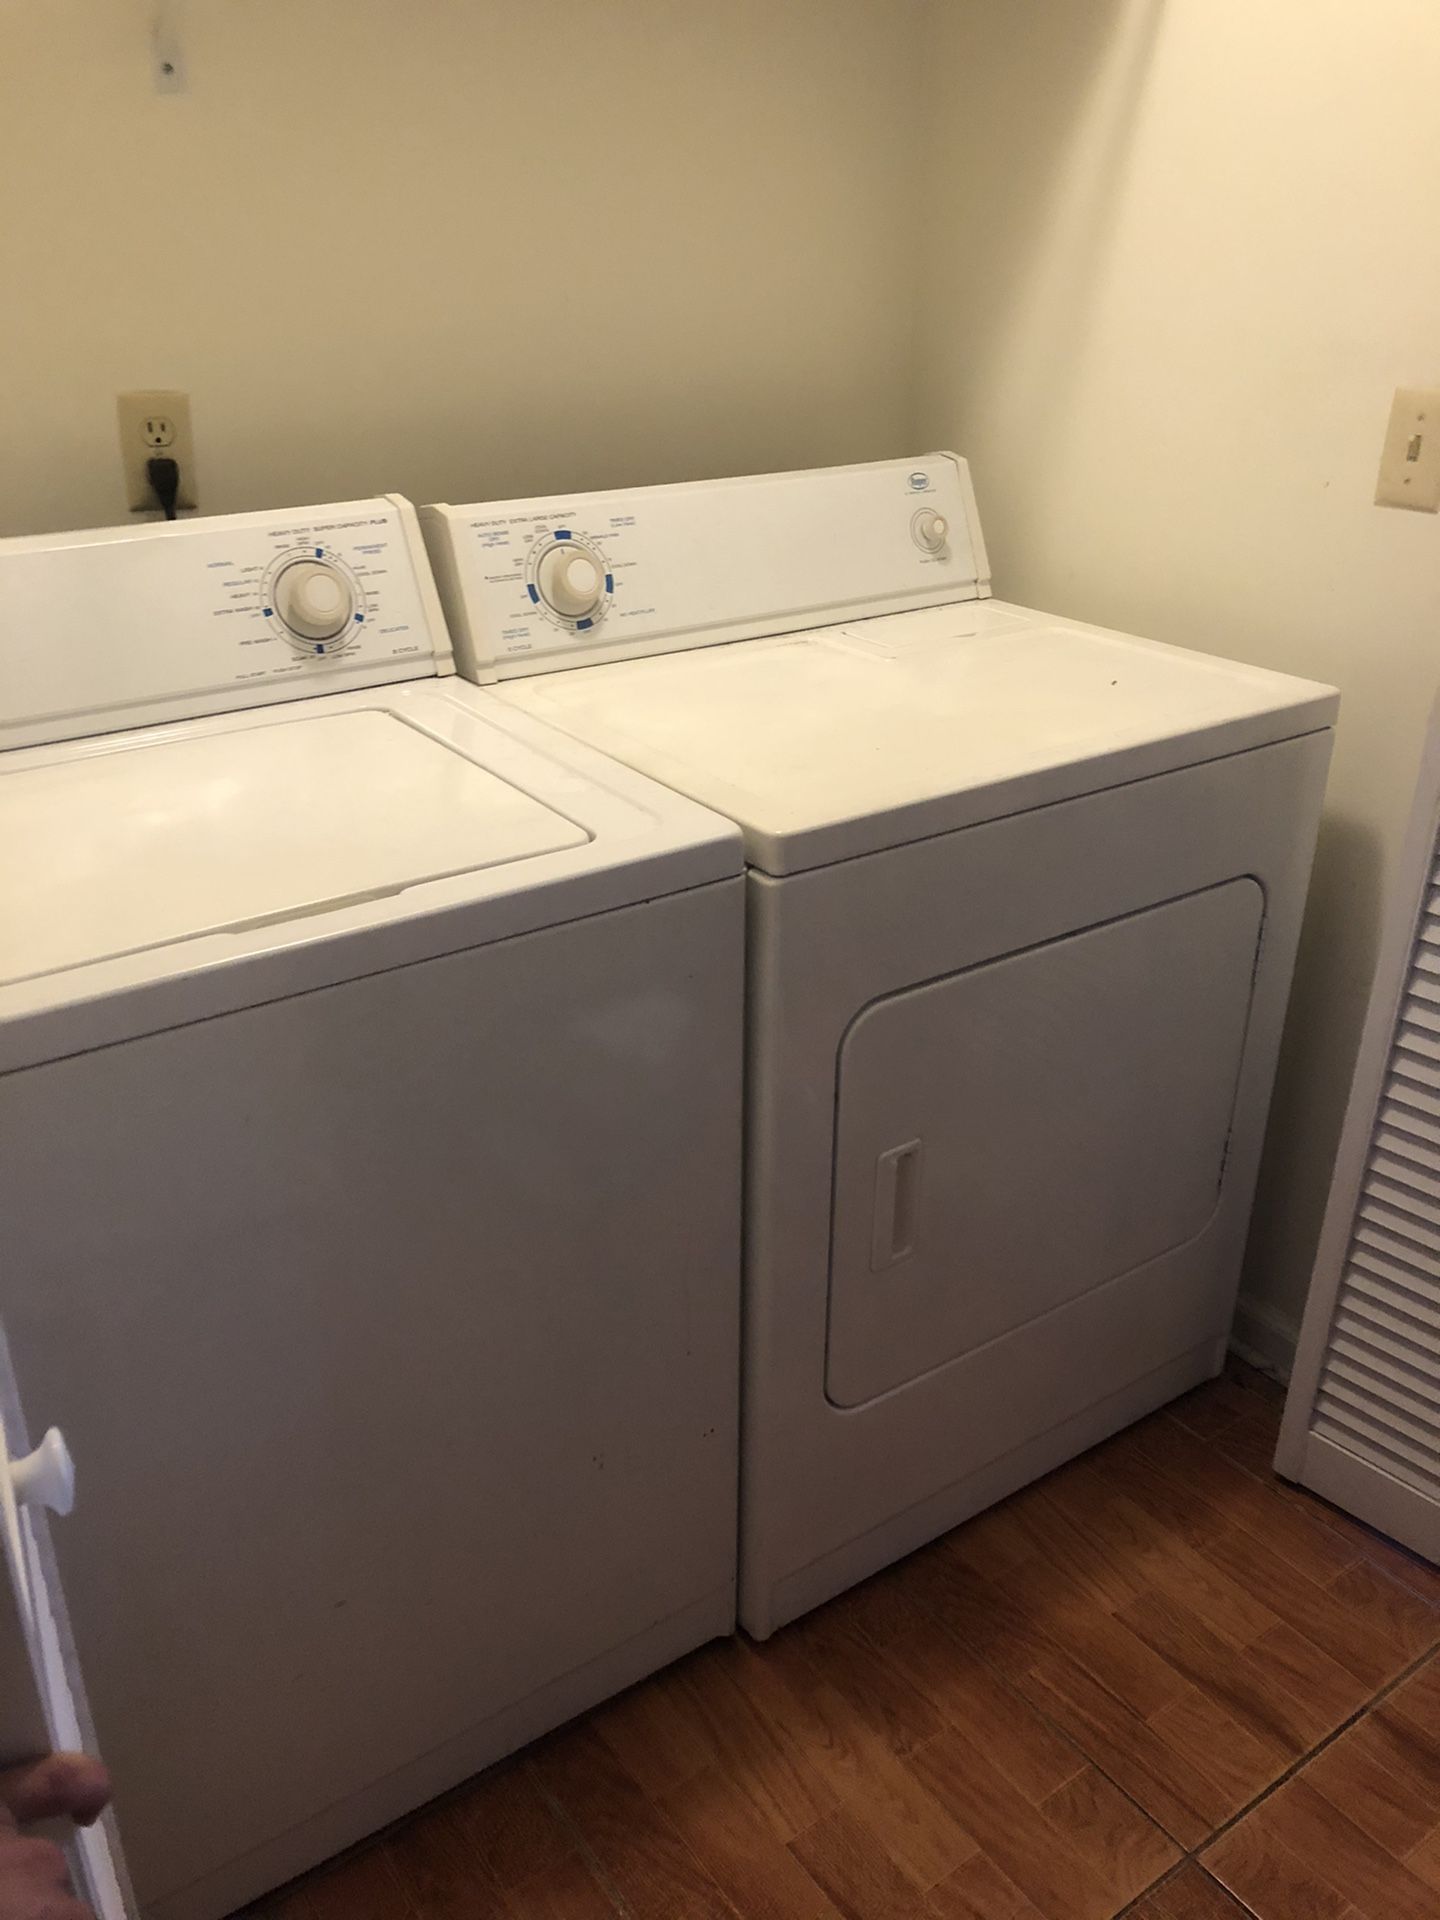 Roper brand washer and dryer